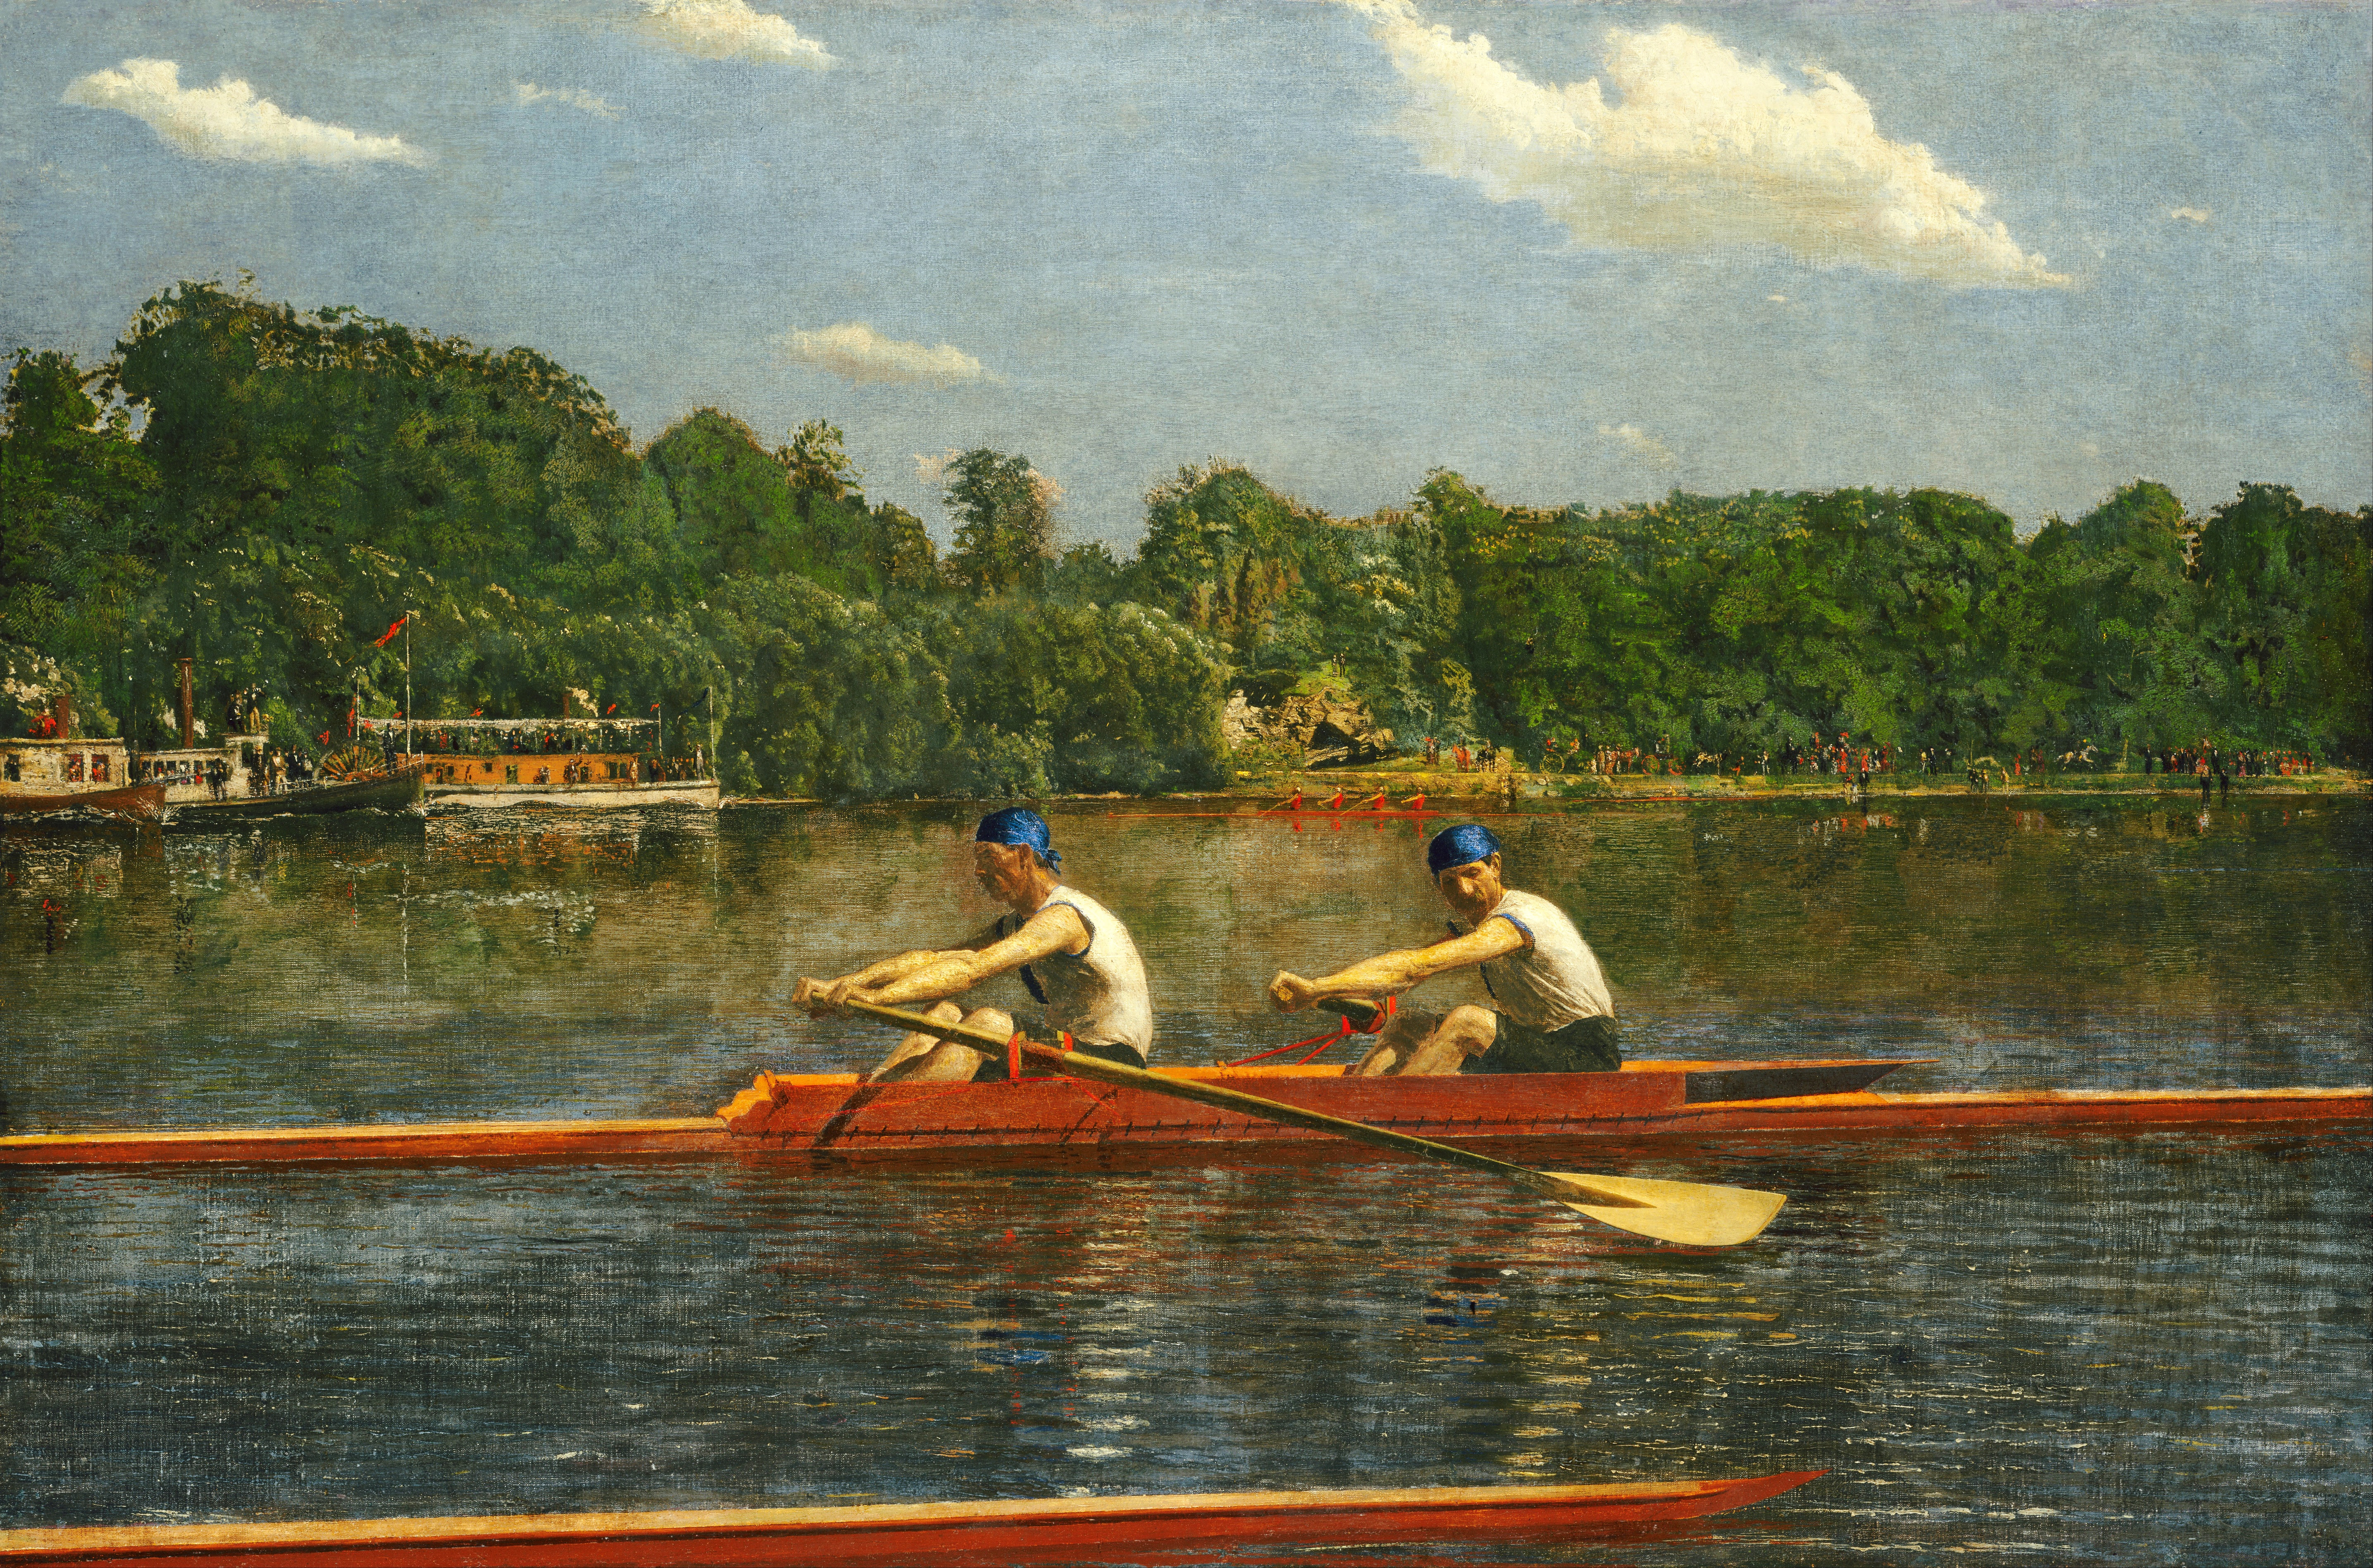 Painting with two rowers in a rowboat, on water, with trees in the background. Rowing art by Thomas Eakins